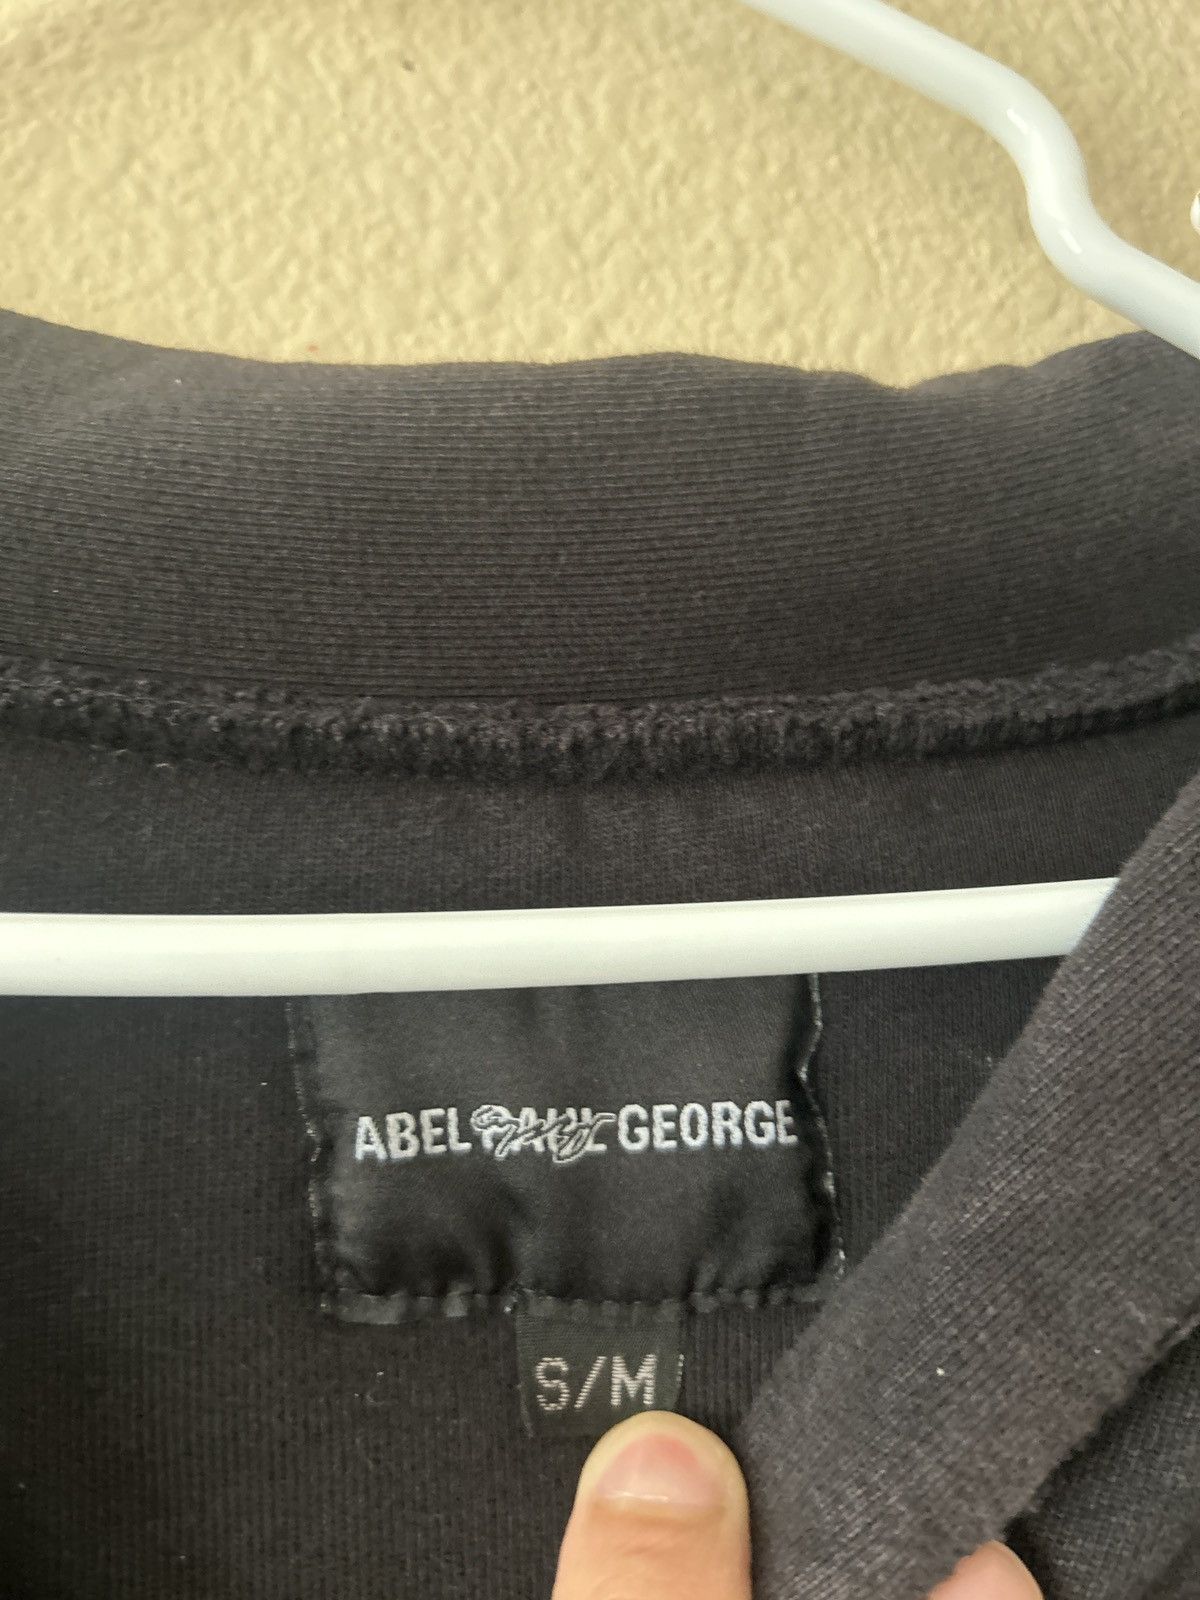 Abel Paul George APG Double Layer Pullover Size US S / EU 44-46 / 1 - 3 Preview